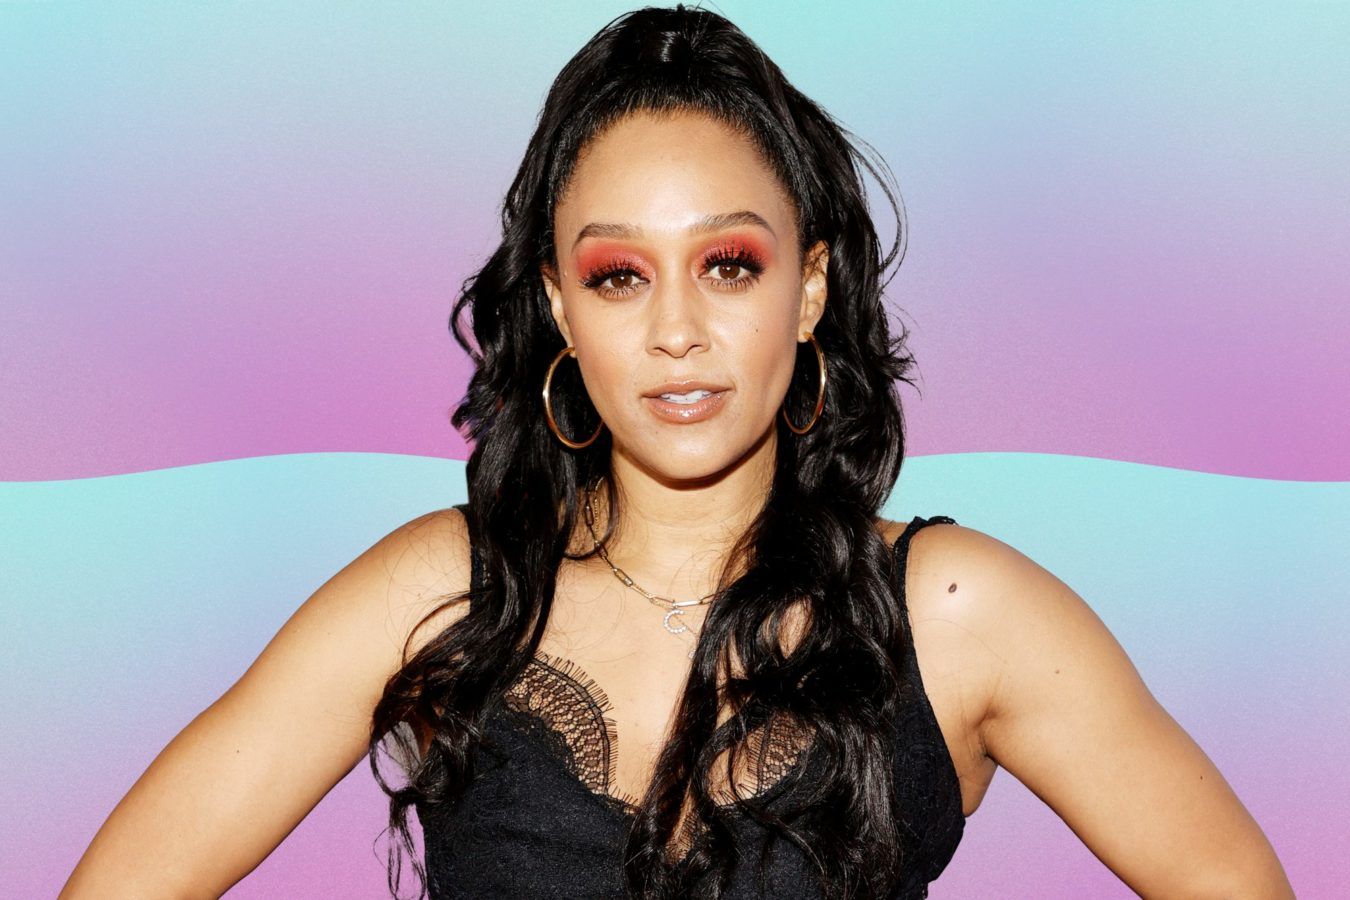 Tia Mowry says she saw ‘a huge shift’ in her health when she changed her eating habits